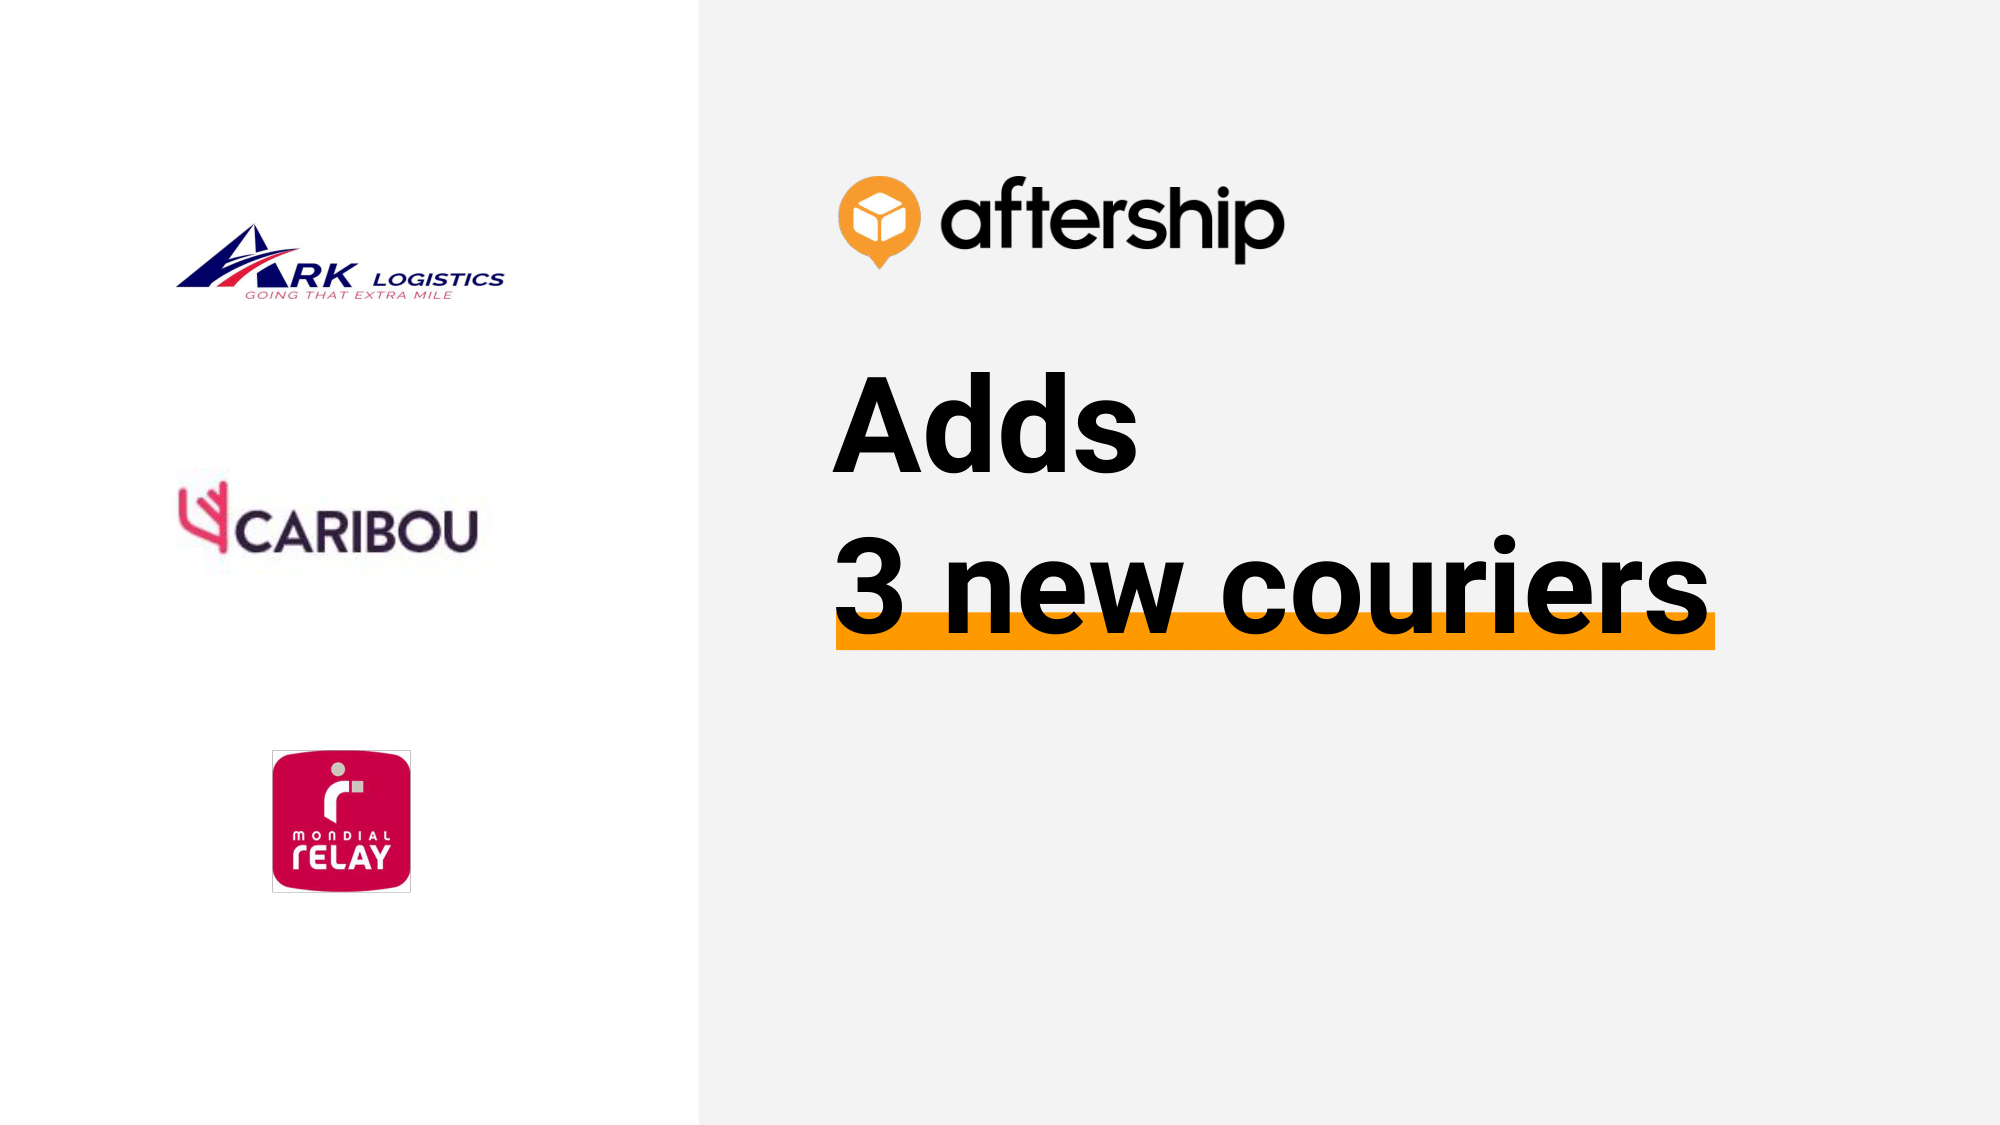 AfterShip adds 3 new couriers this week (7 Sep 2020 to 11 Sep 2020)